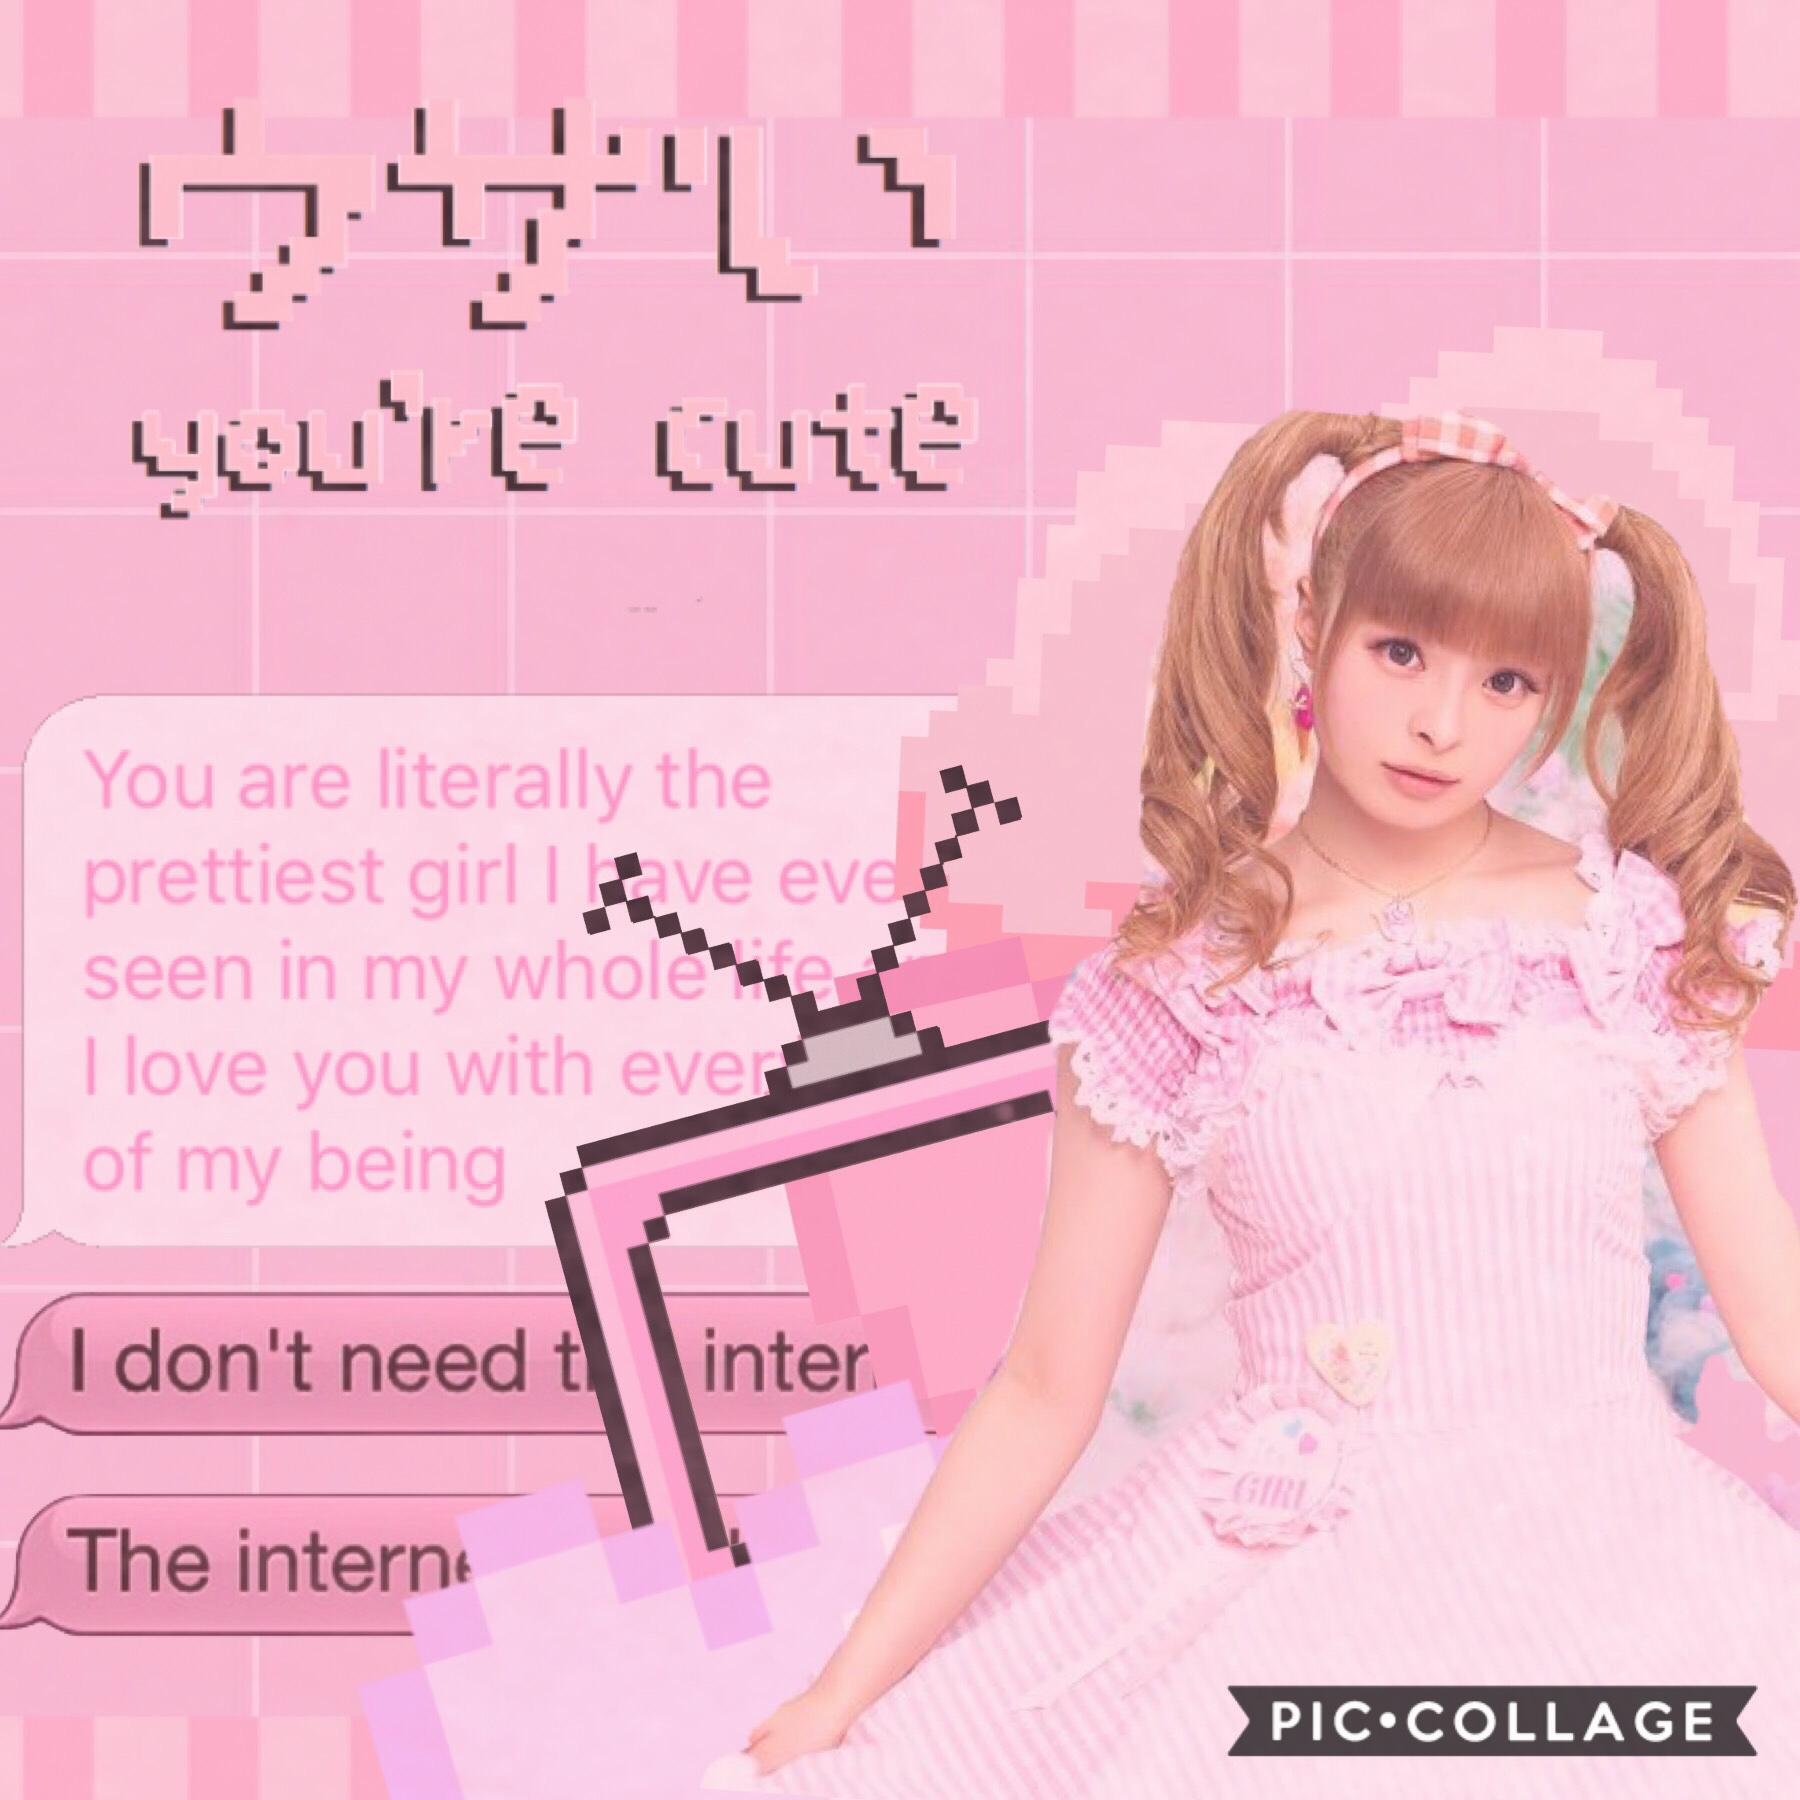 Tap, pon💕
Okay, so finals have been sucking up my soul, but i managed to set a little time aside to make this edit! I actually really like it, Kyary Pamyu Pamyu is one of my favorite j-pop idols! 
I started watching Attack on Titan and it. Is. AMAZING AHH